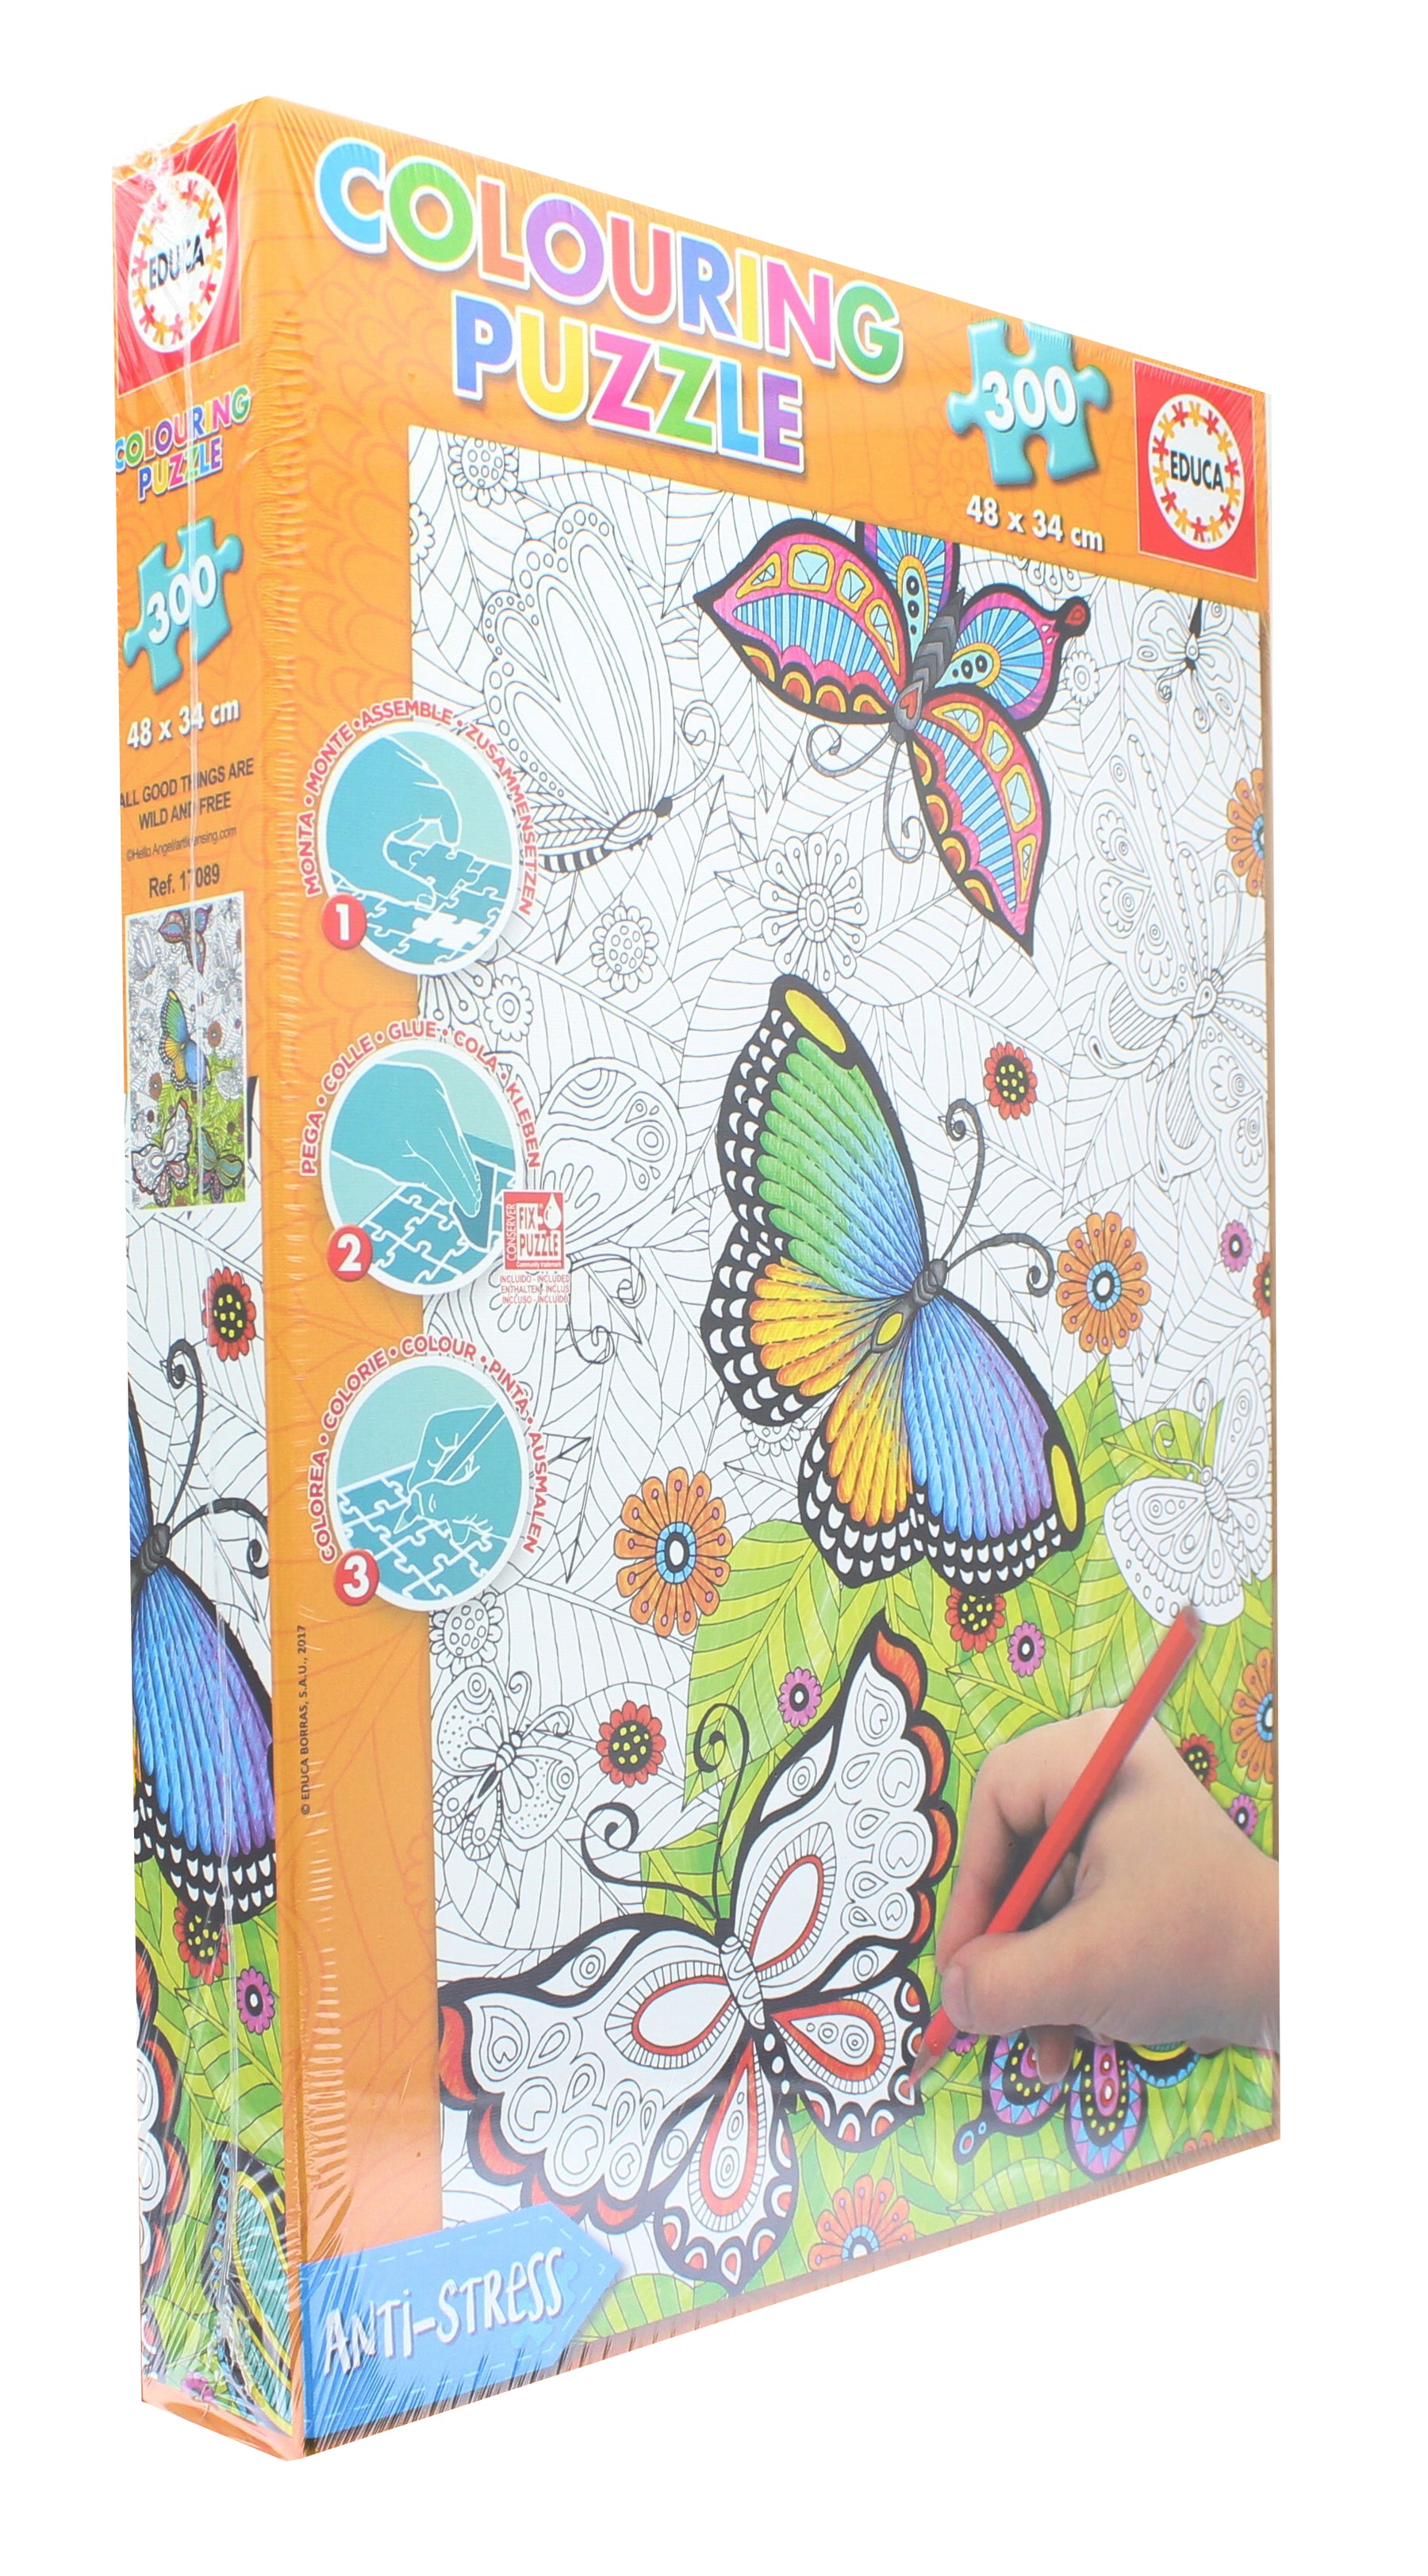 All Good Things are Wild and Free 300 Piece Coloring Jigsaw Puzzle